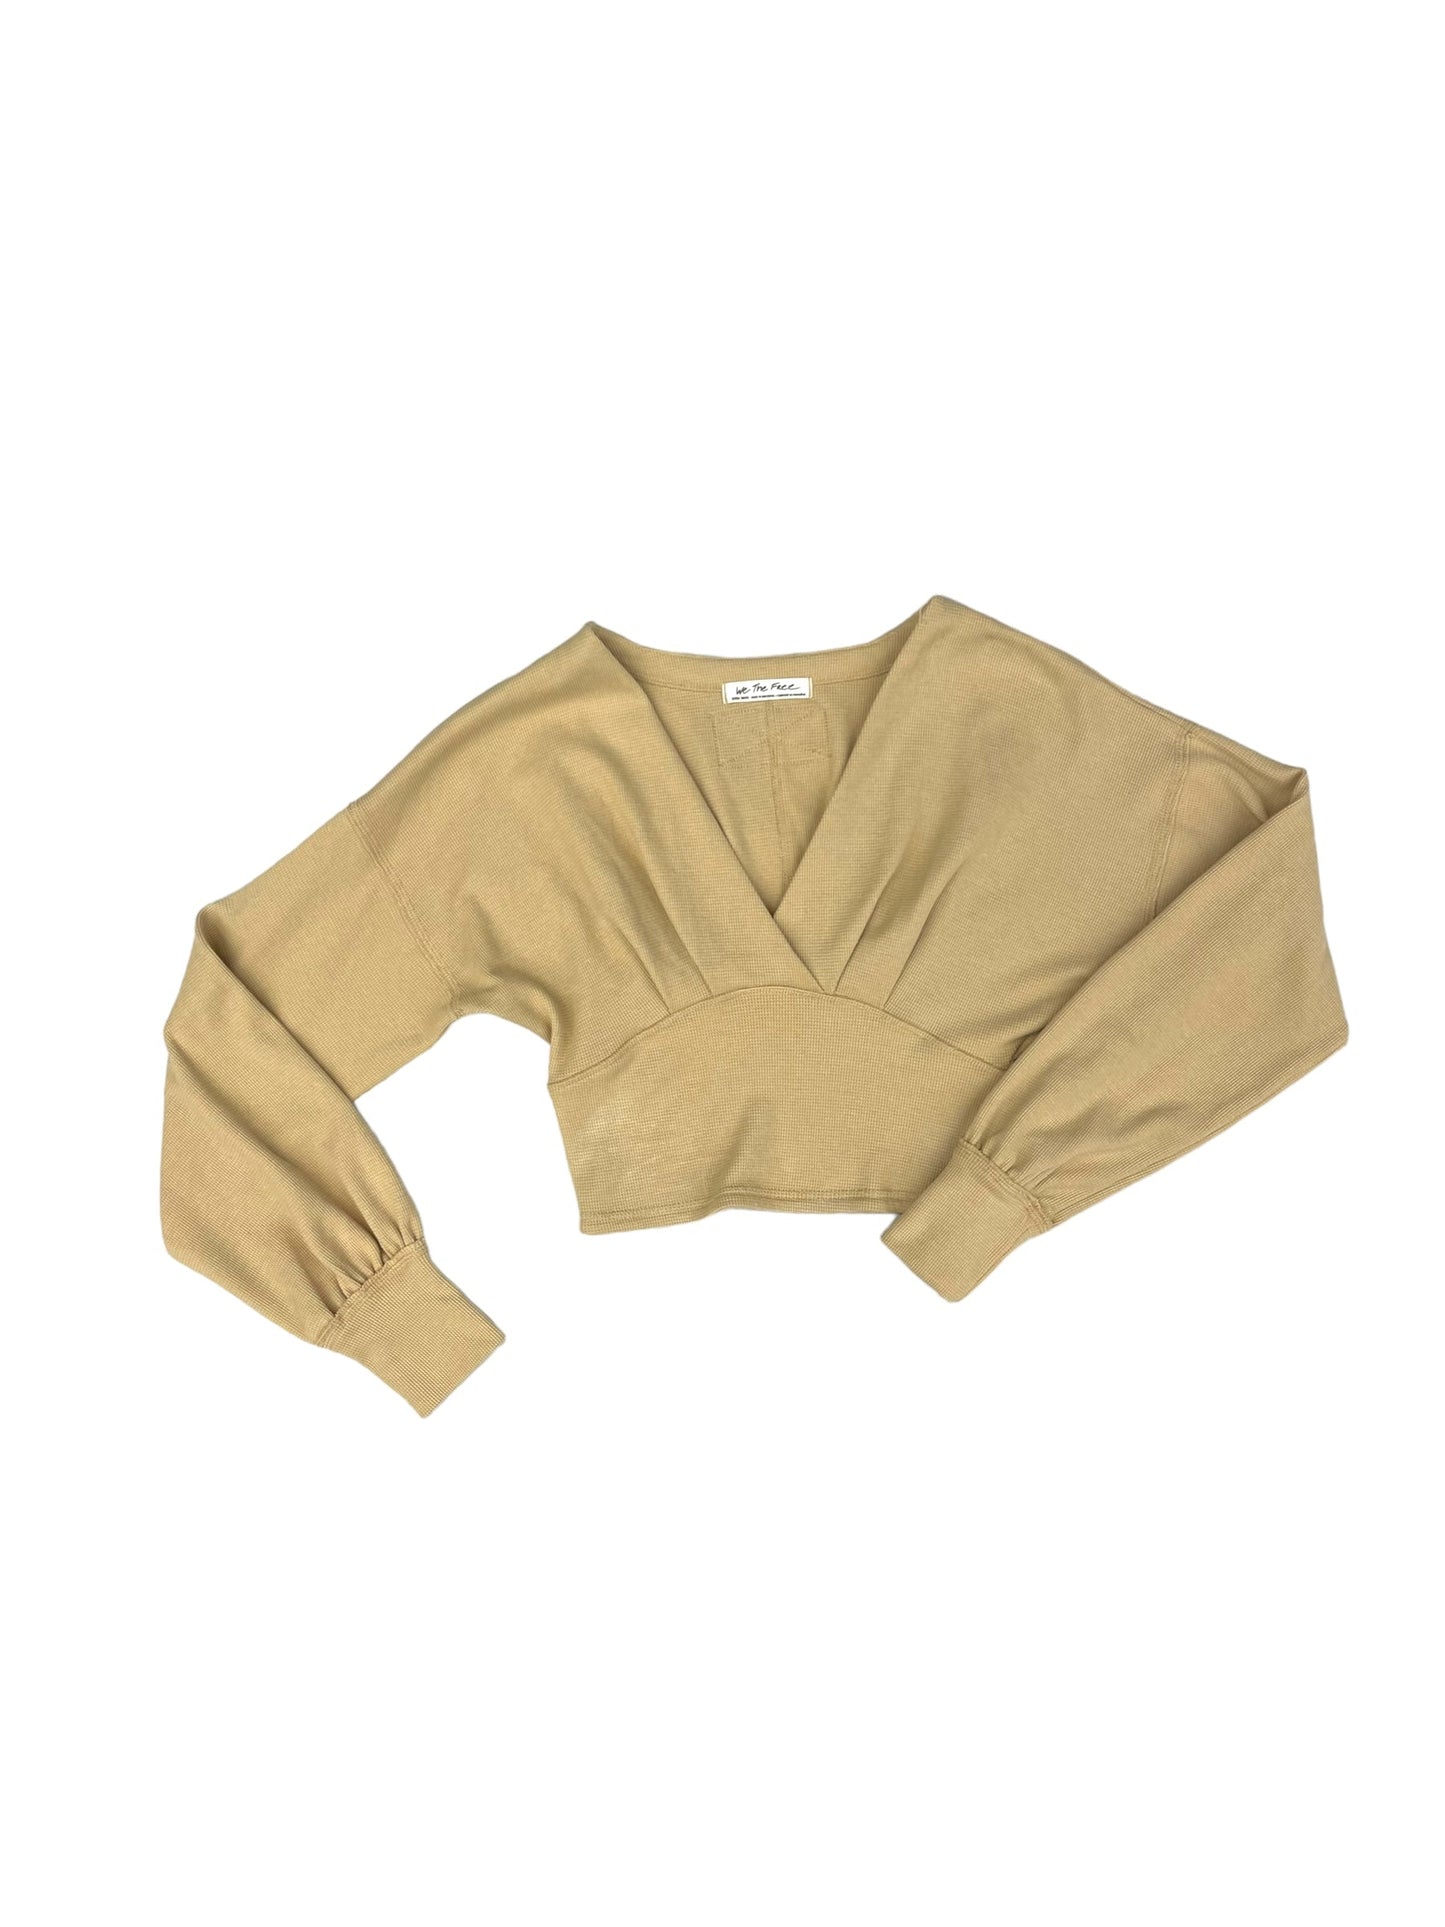 Tan Top Long Sleeve We The Free, Size Xs